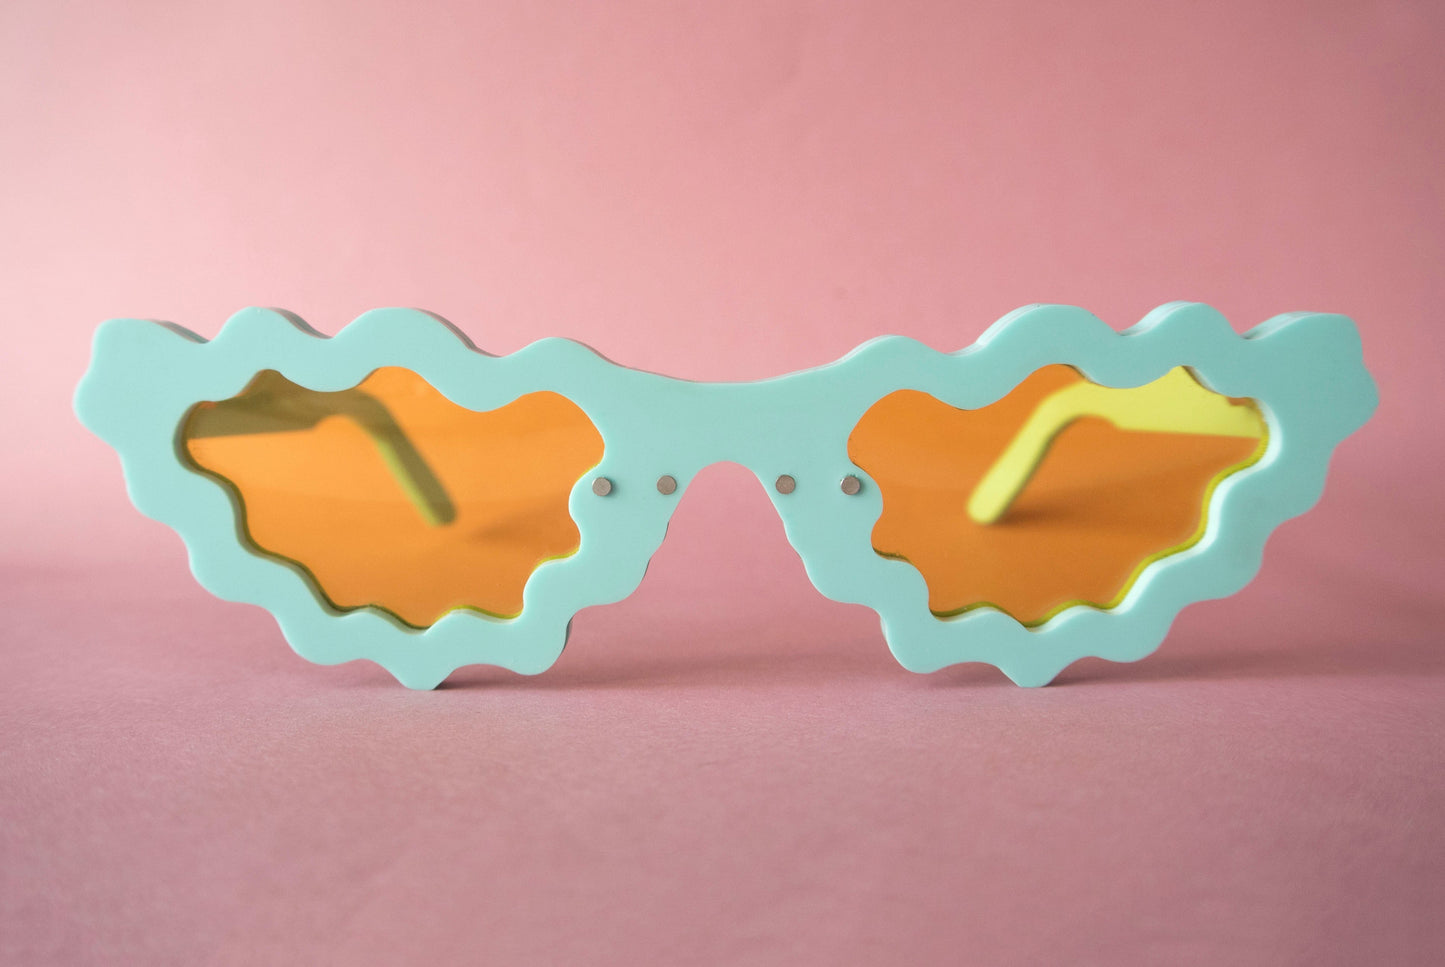 Spearmint librarian glasses on a pink background